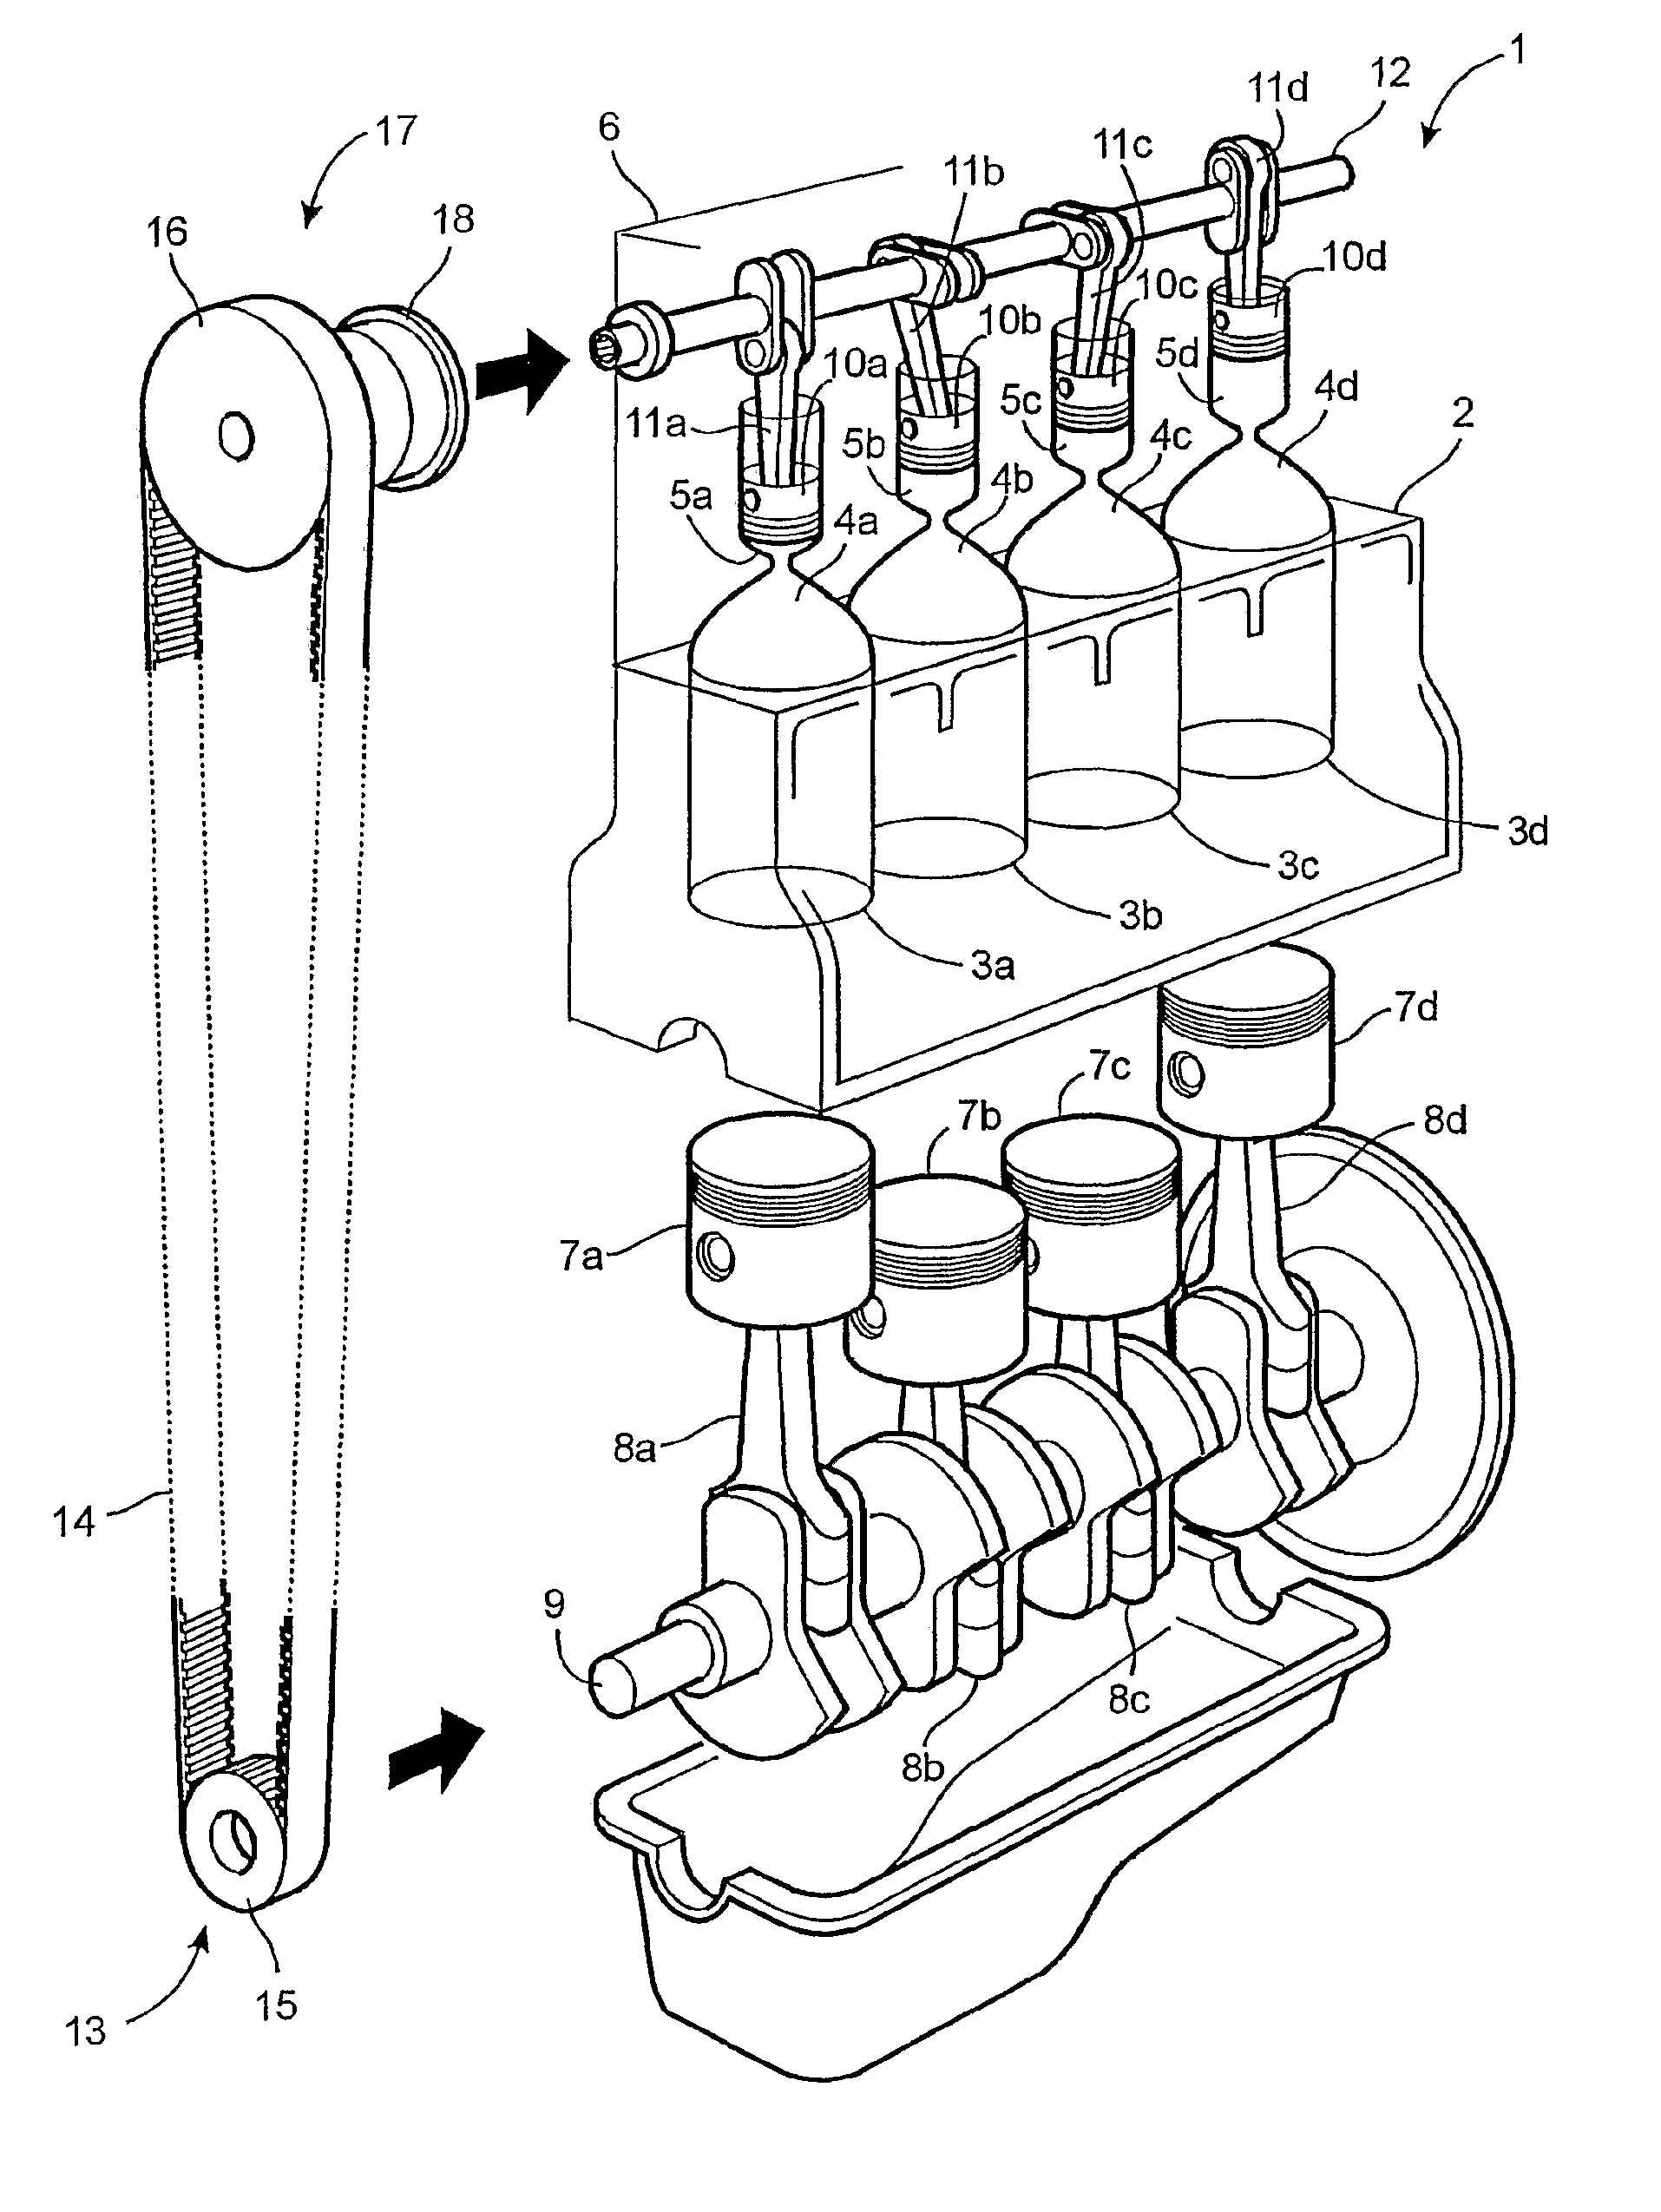 Device for controlling the phase angle between a first and a second crankshaft